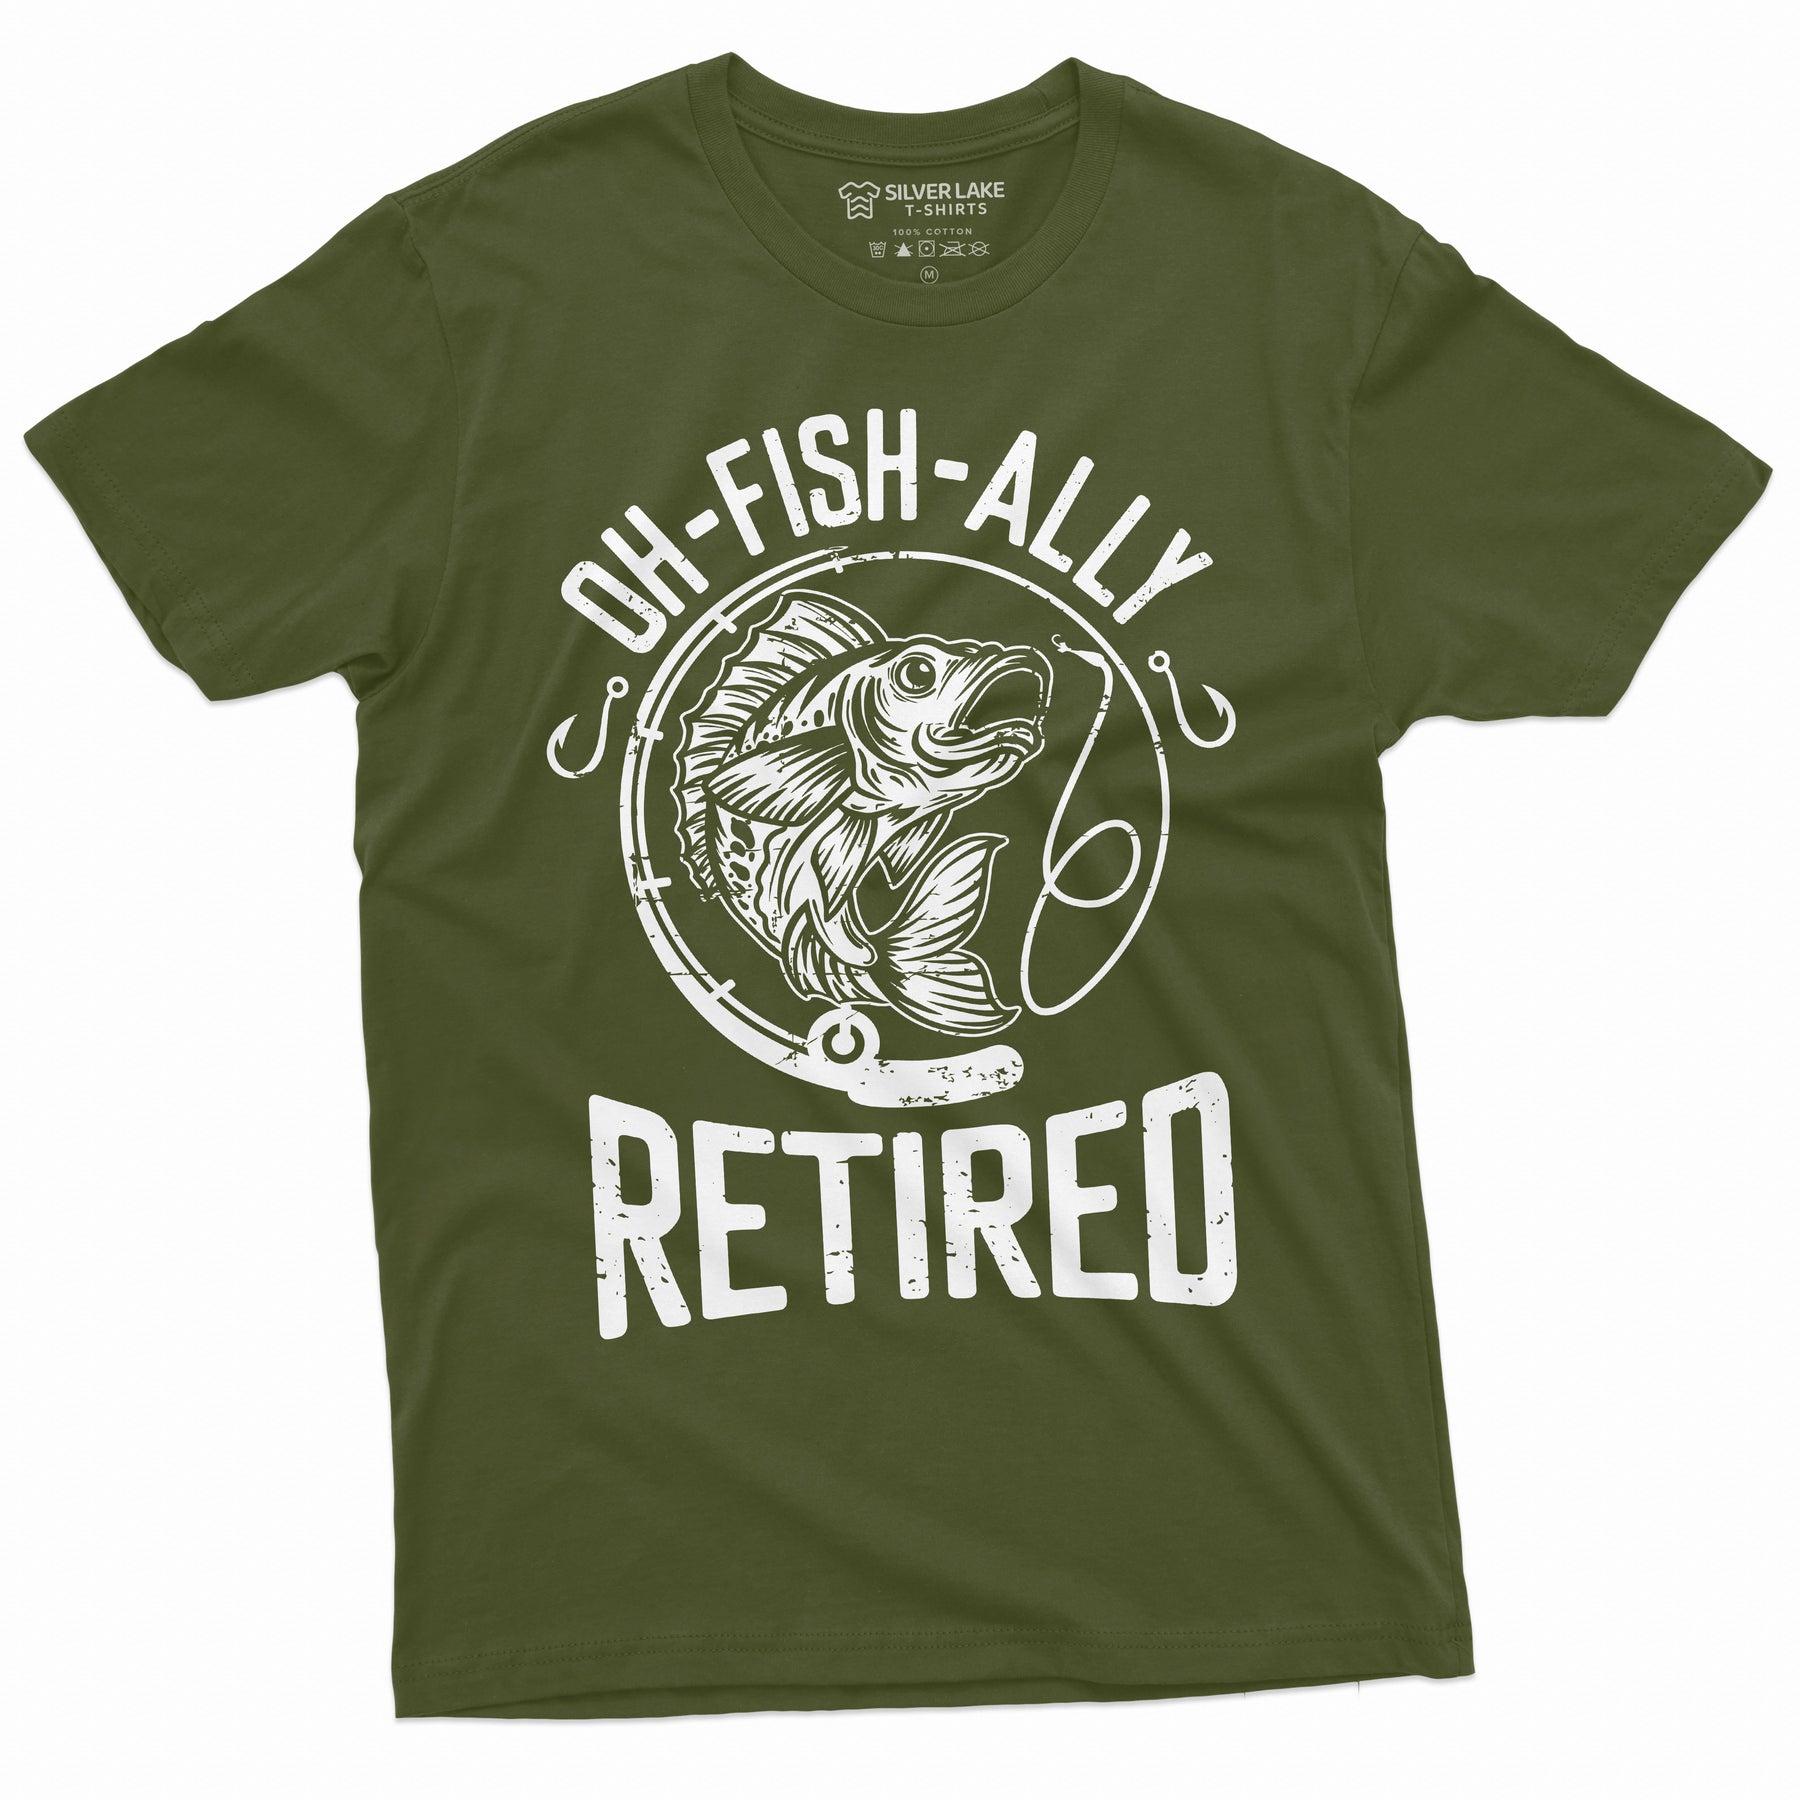 Oh-fish-ally Retired Mens T-Shirt Retirement Fishing Gifts Papa Grandpa Dad Father Retired Fisherman Humor Tee L / Grey